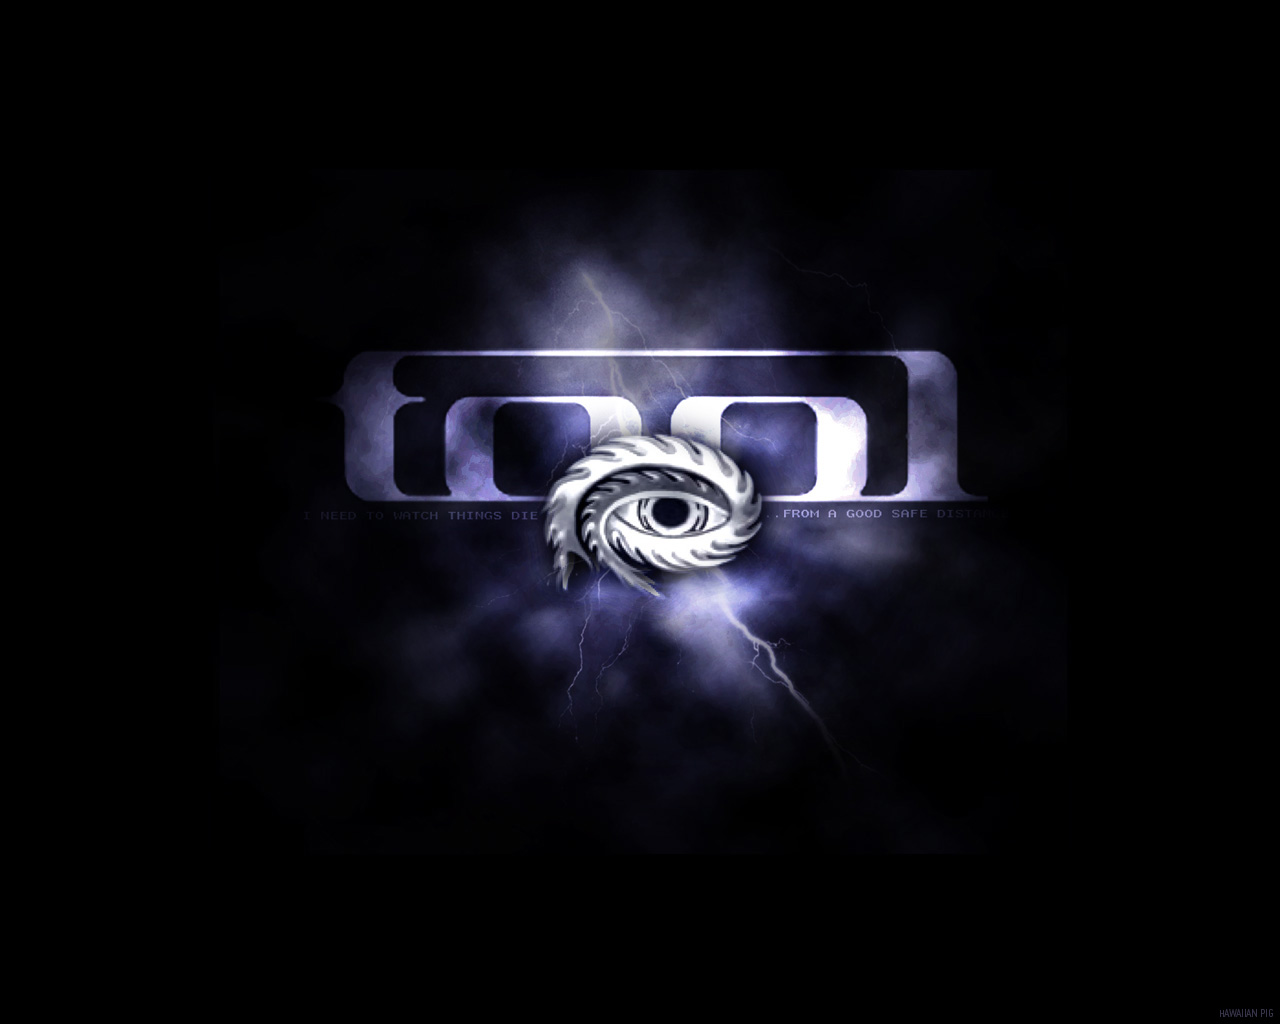 Tool Band Quotes. QuotesGram